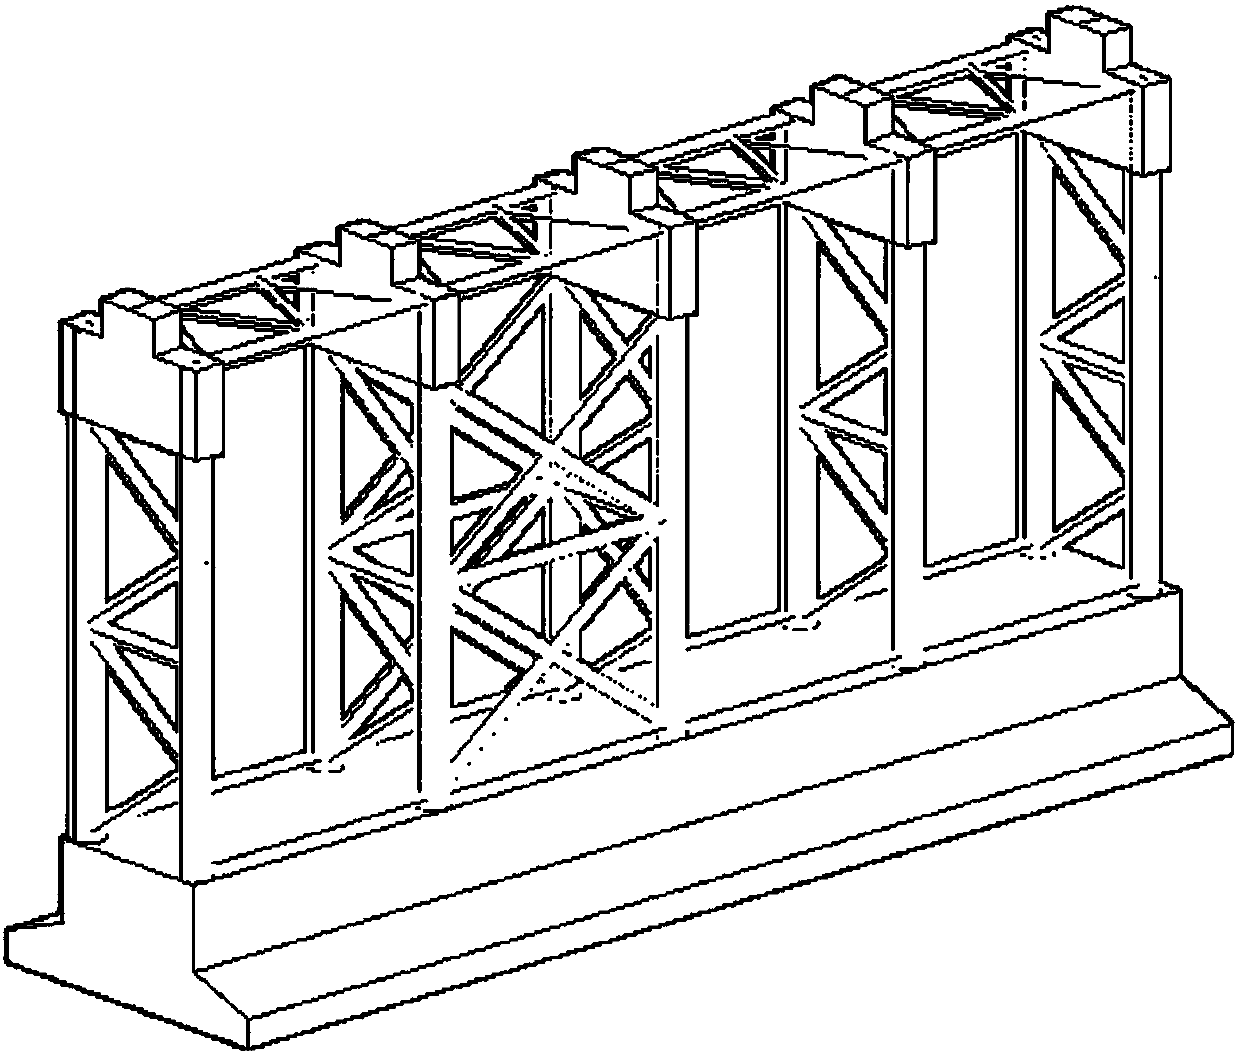 A Synchronous Sliding Construction Technology of Double-span Network Frame with Center Column